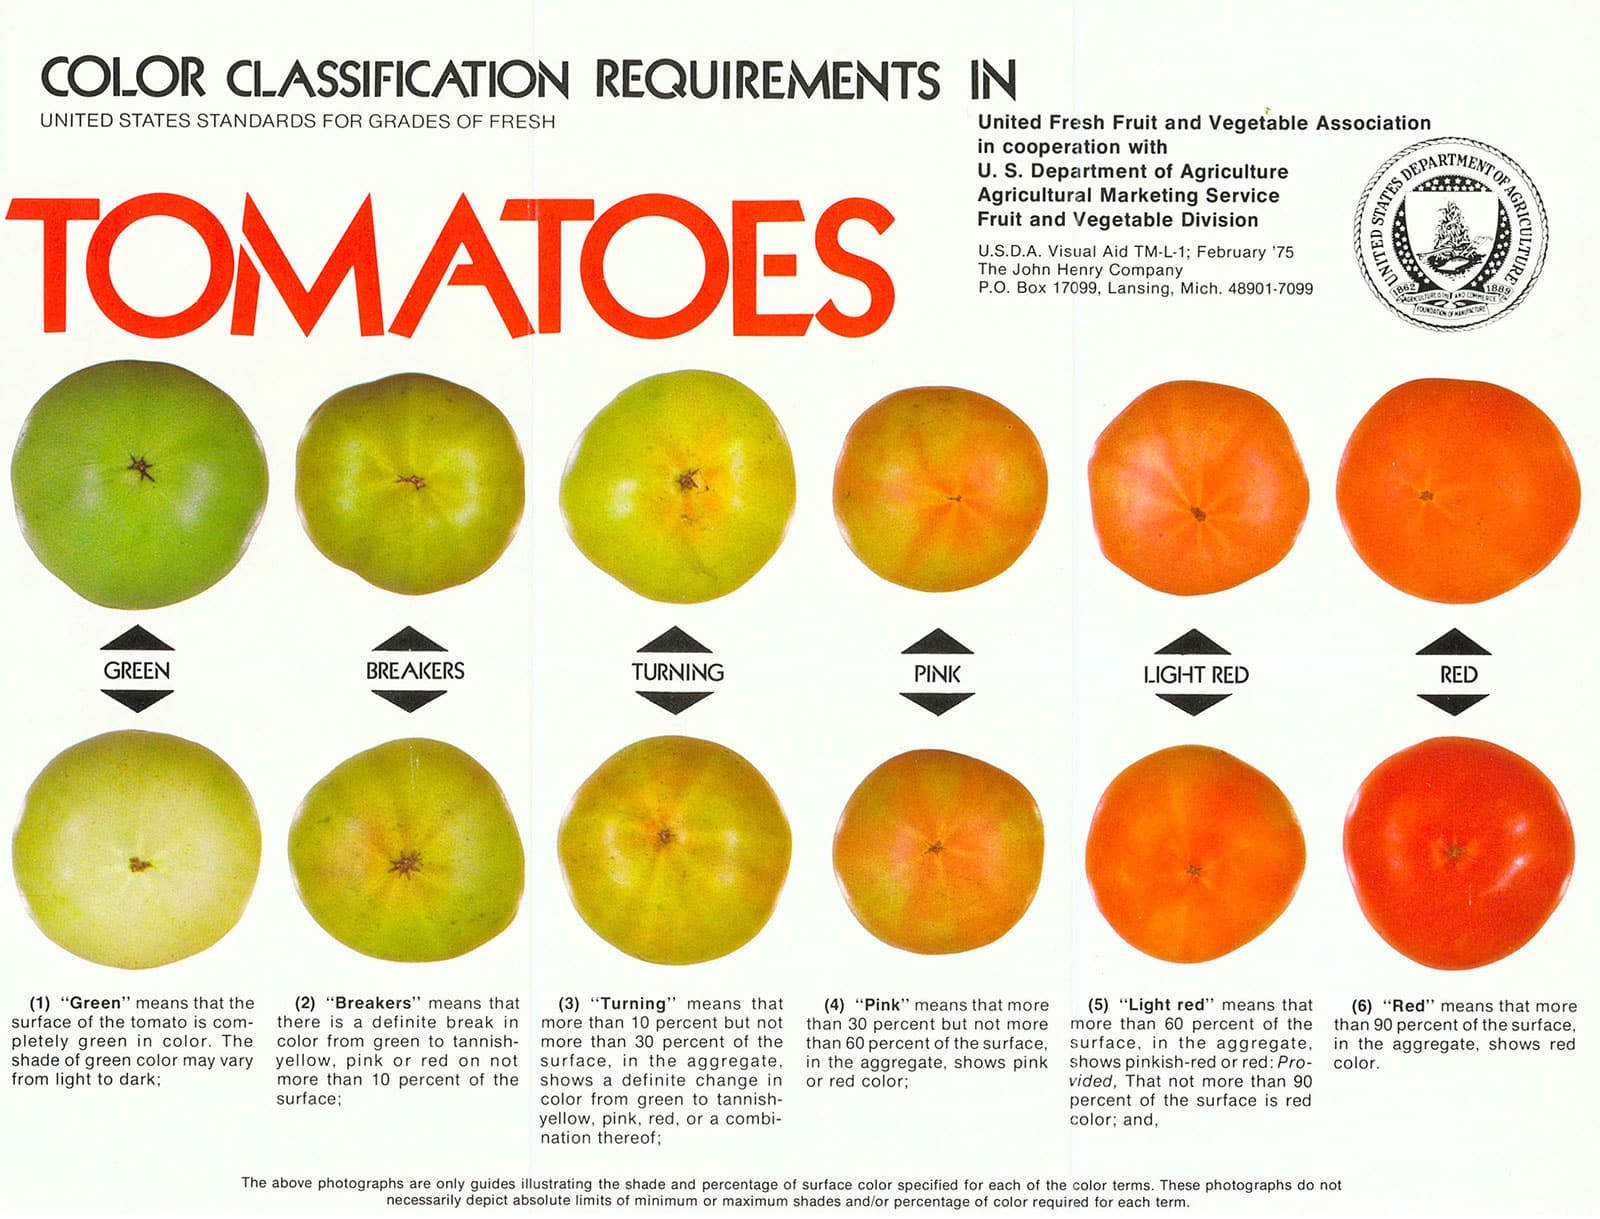 USDA chart showing tomato color classification